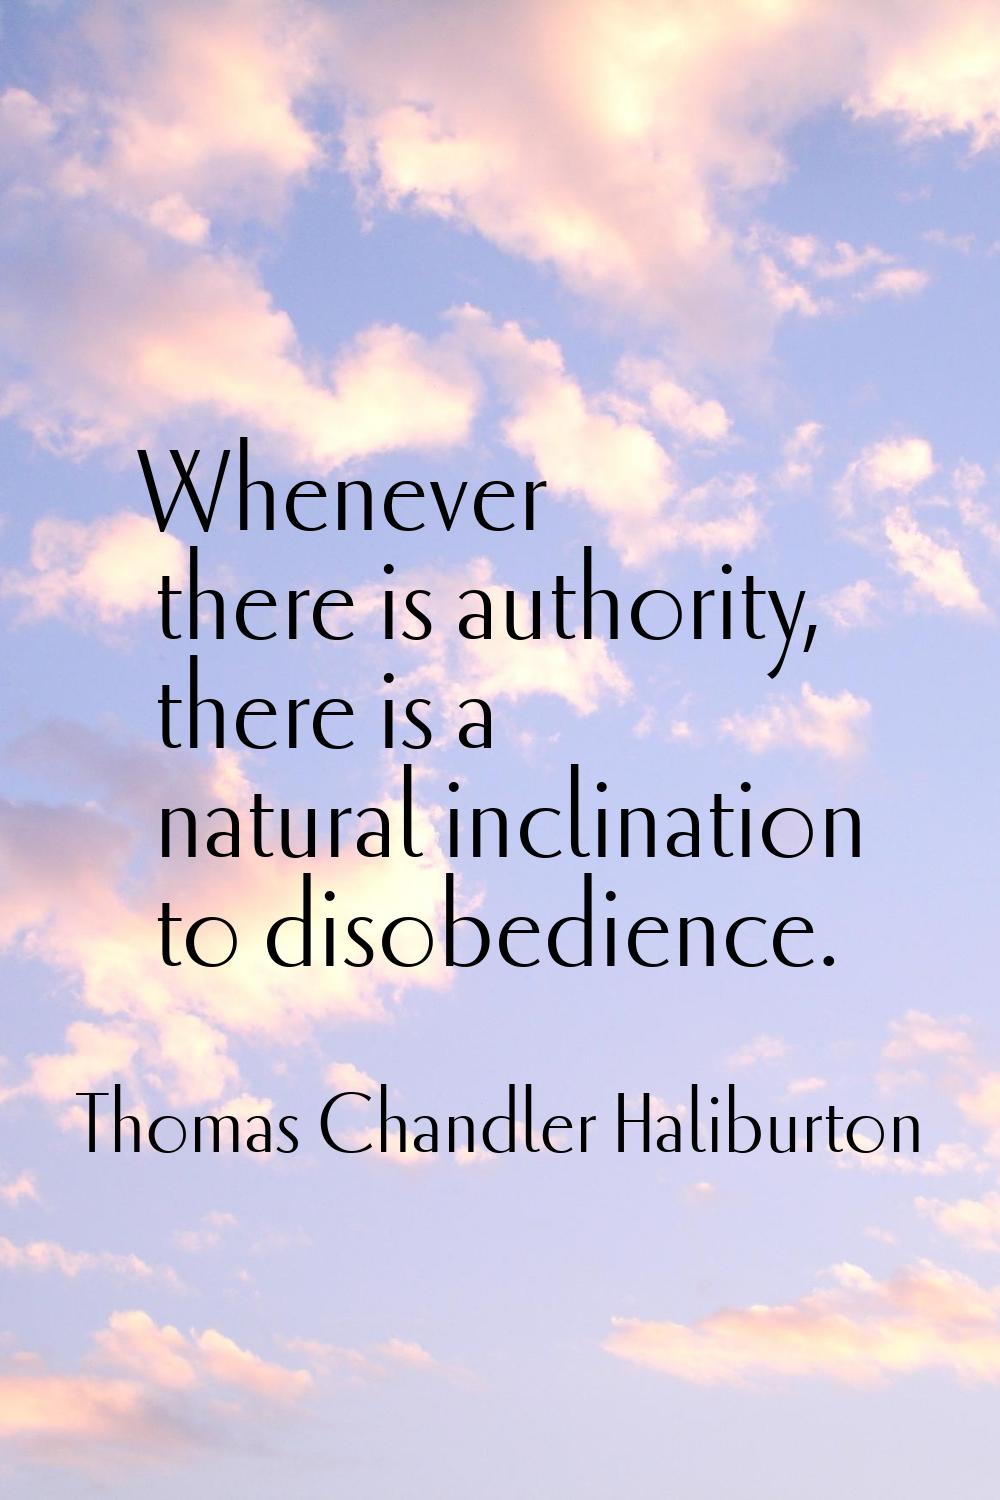 Whenever there is authority, there is a natural inclination to disobedience.